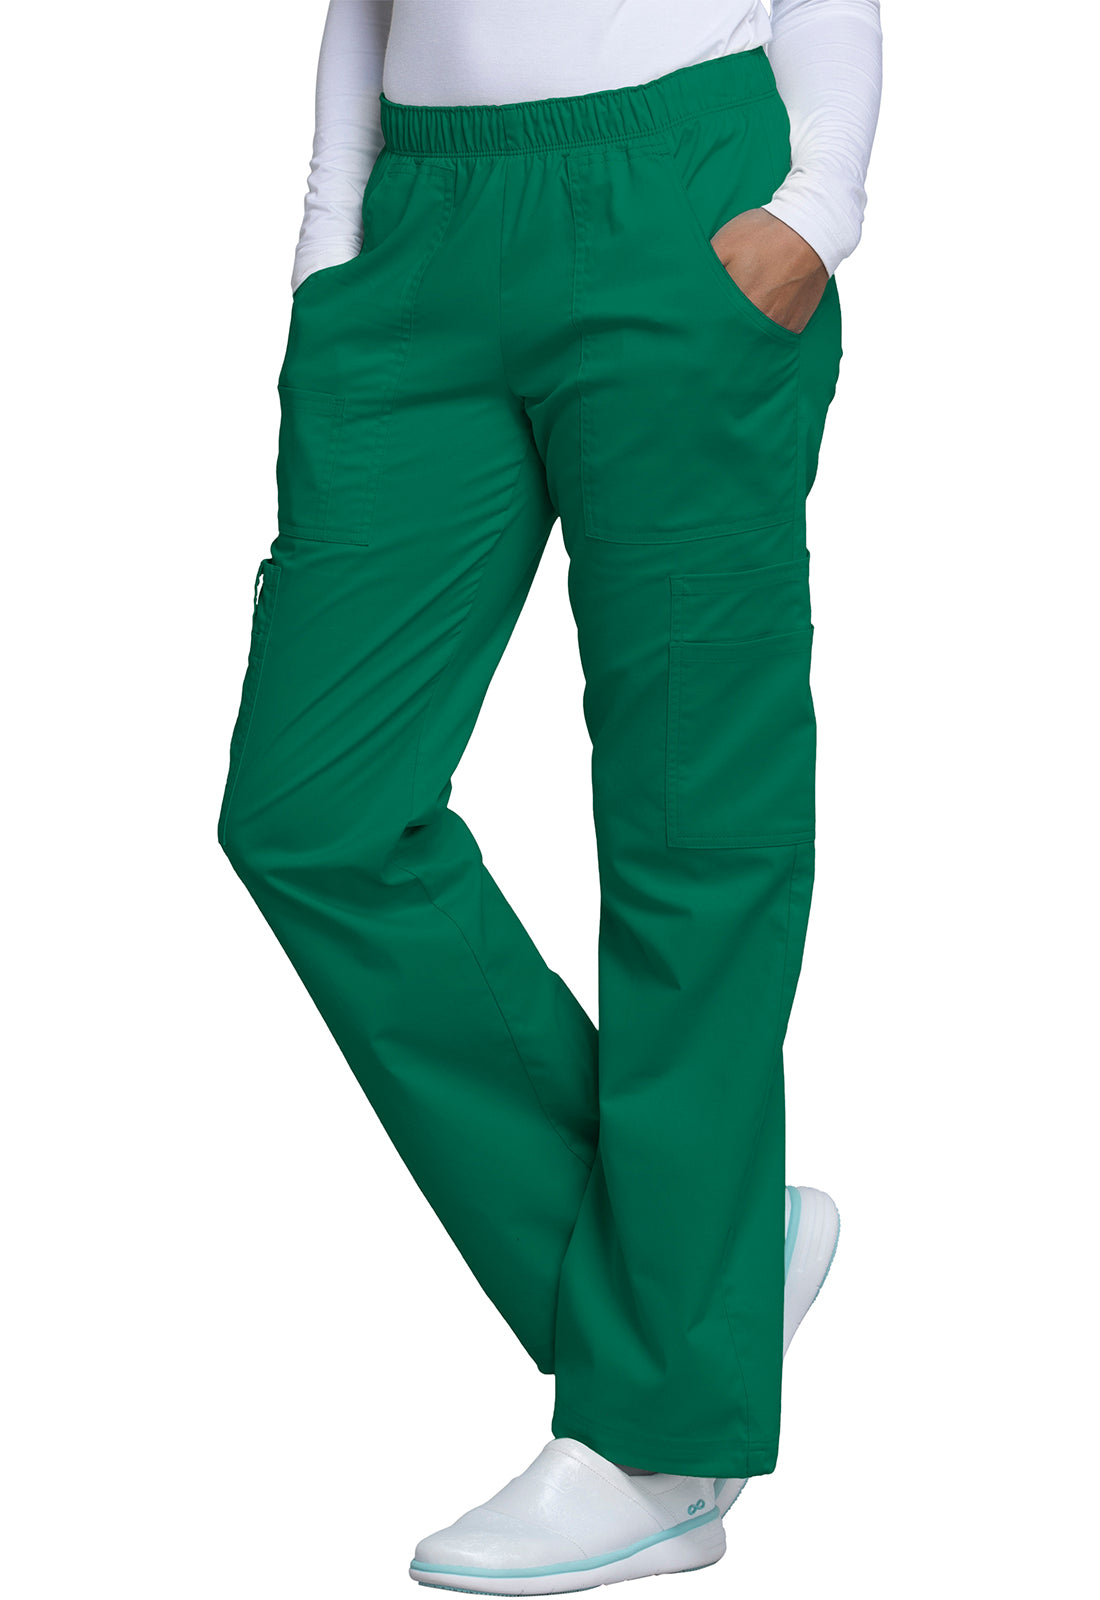 Nurse scrub pants in forest green.  Mid Rise Pull-On Cargo Pant in Hunter Green